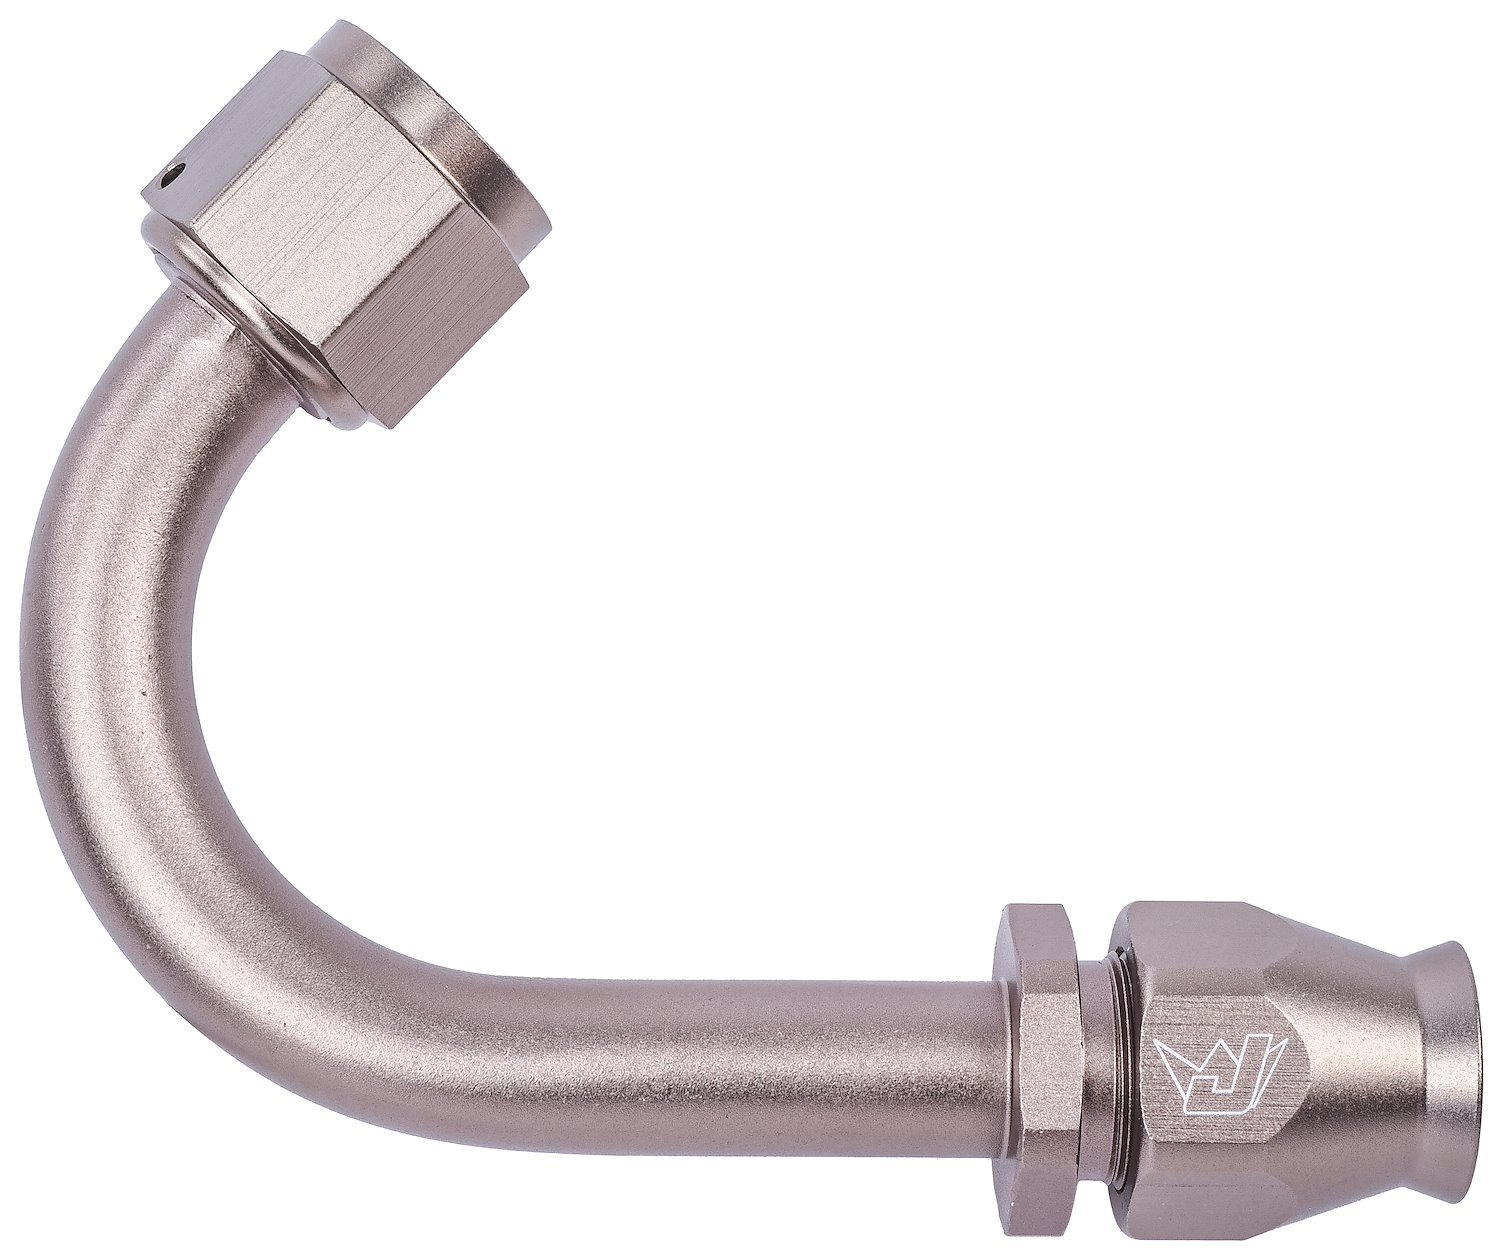 AN 135-Degree A/C PTFE Hose End Fitting [-8